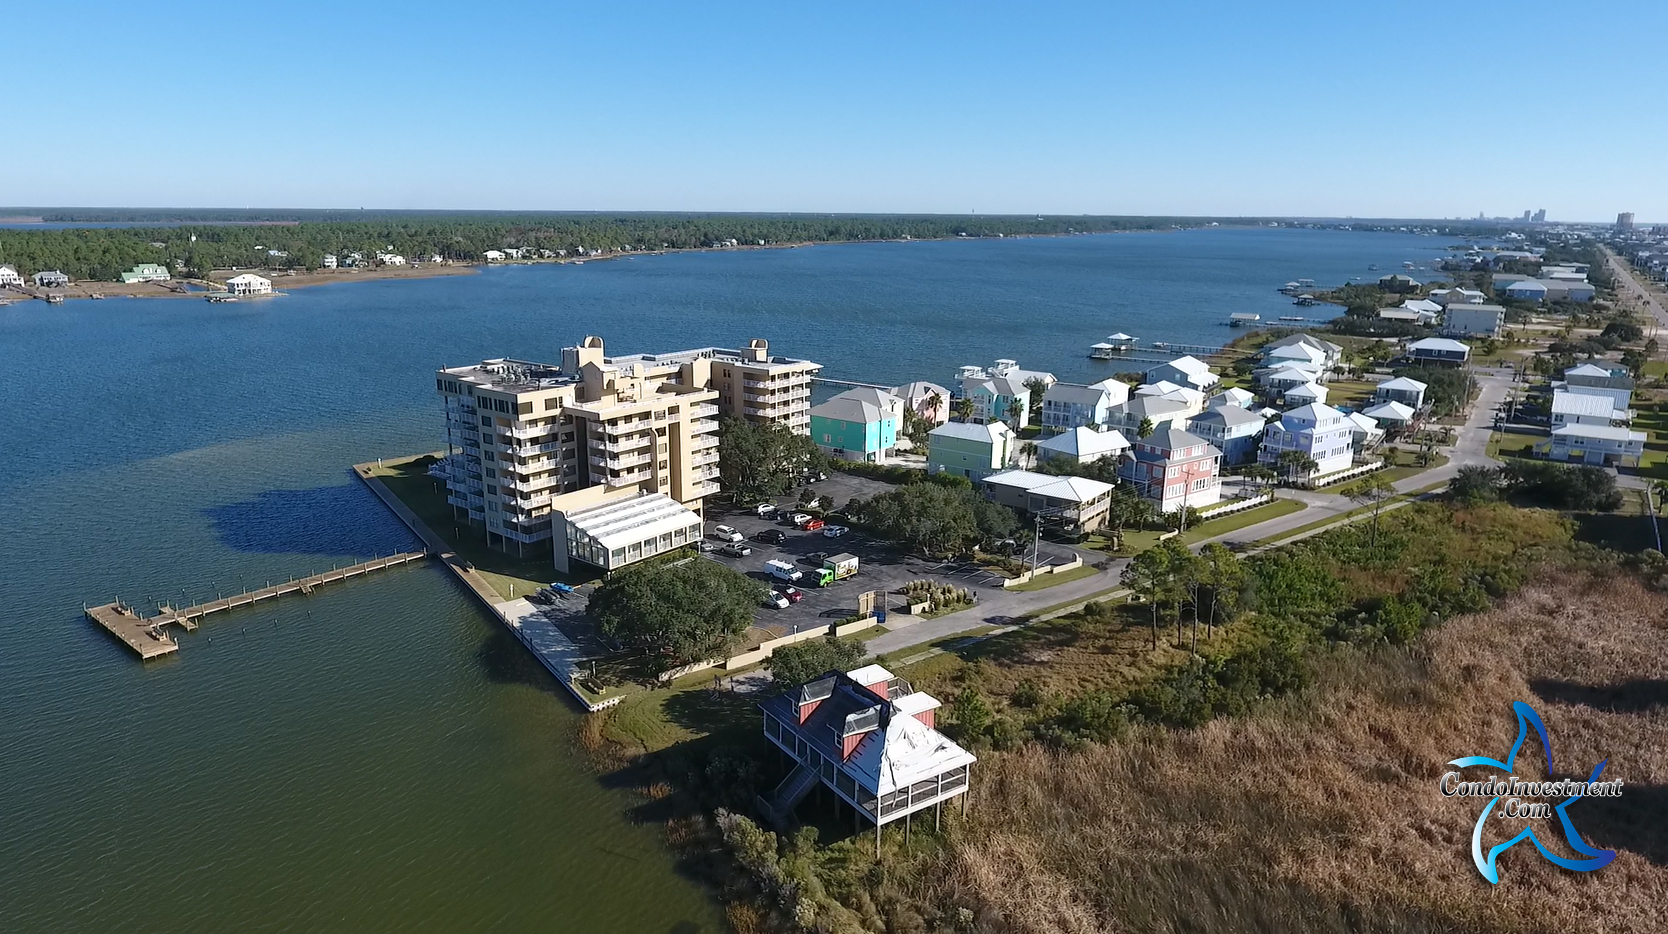 Compass Point and surrounding area in Gulf Shores